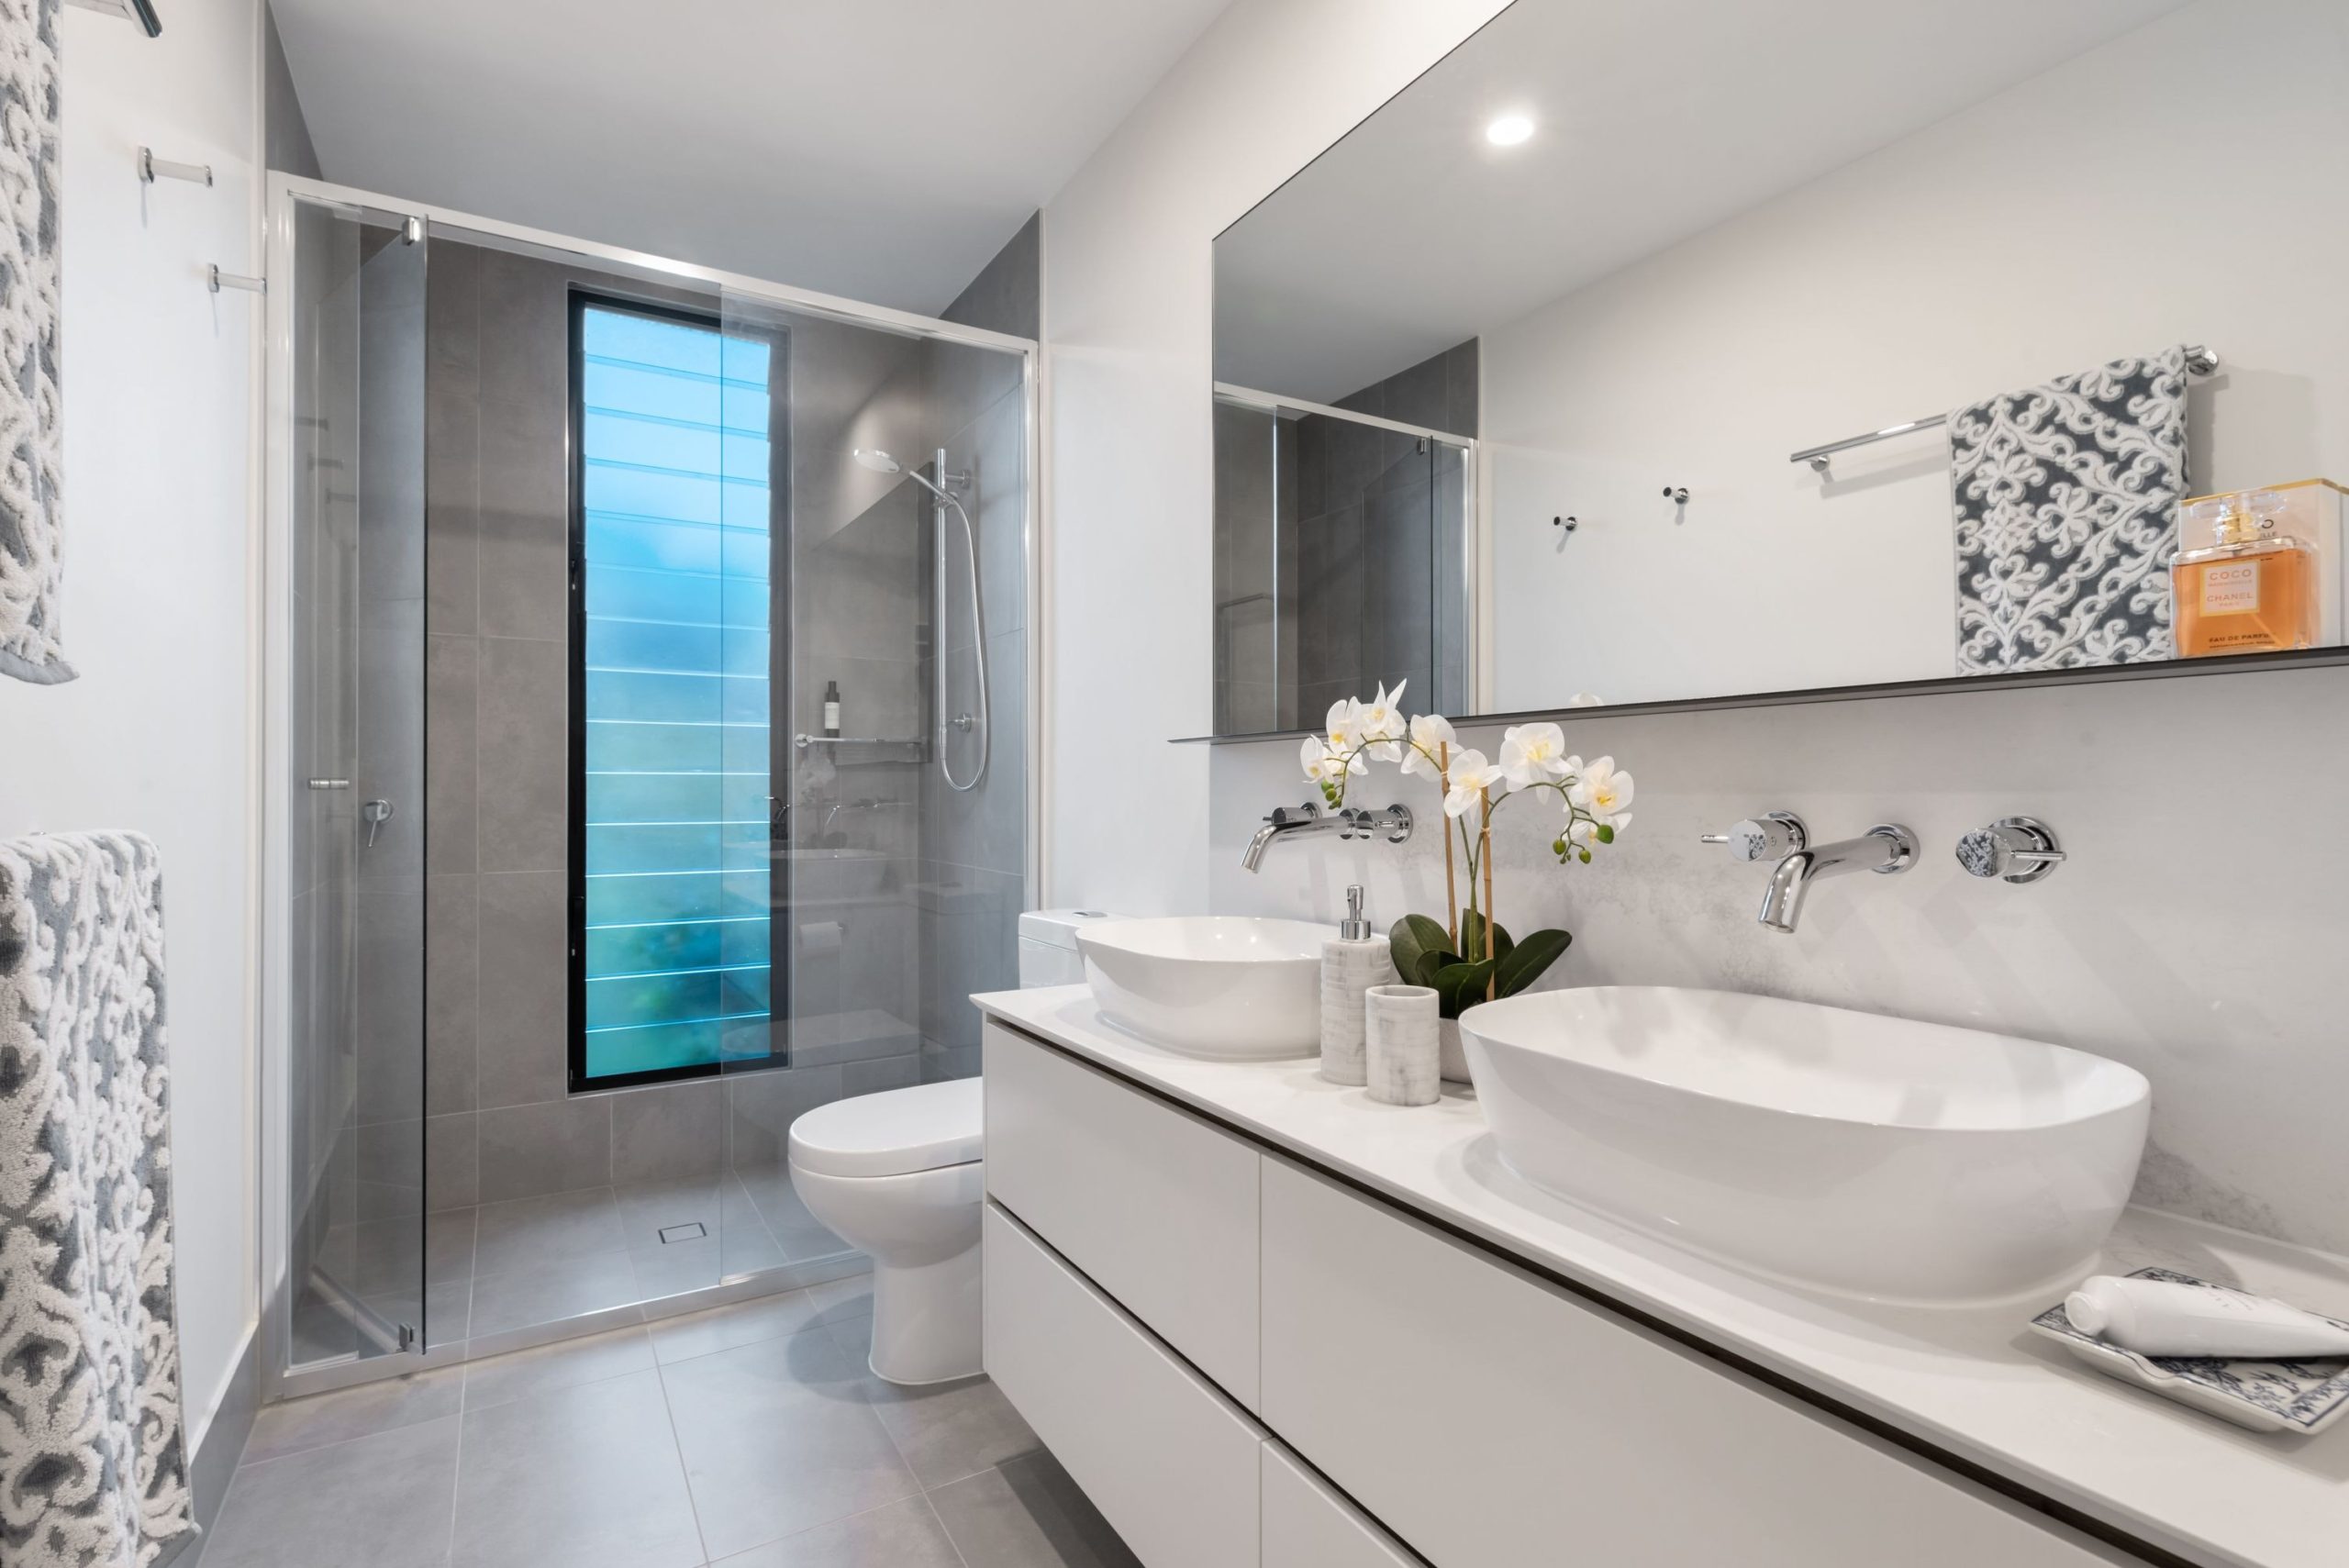 Improving Aesthetic Appeal of your Home with a Bathroom Renovation